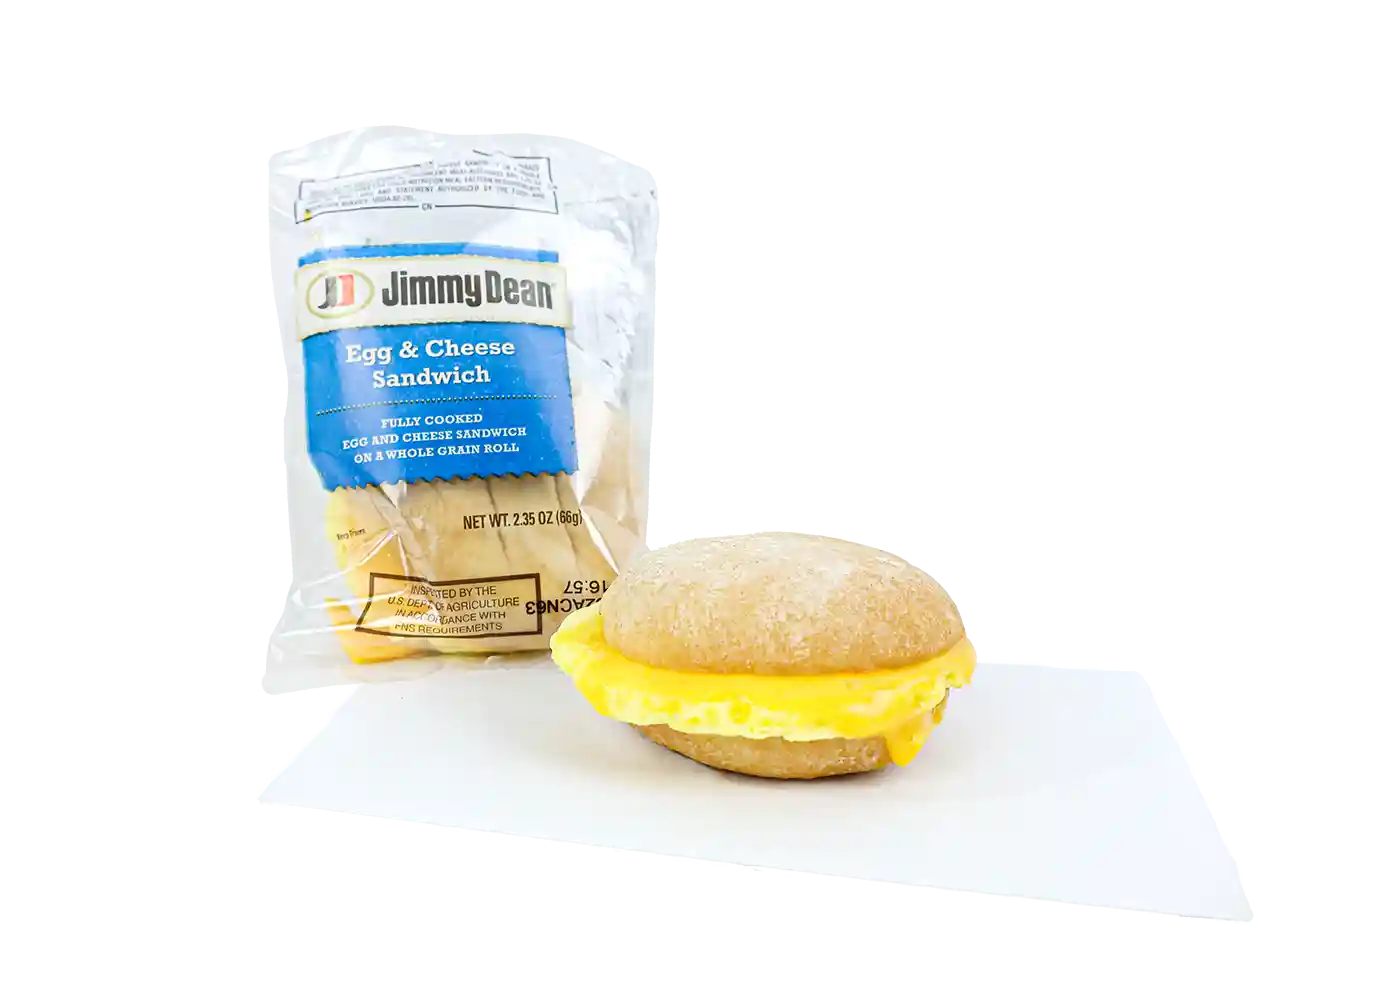 Jimmy Dean® Individually Wrapped Egg & Cheese Breakfast Sandwich, 100/2.35 oz.https://images.salsify.com/image/upload/s--lfv7ppCn--/q_25/adodhwmeqdzzqxphjct8.webp